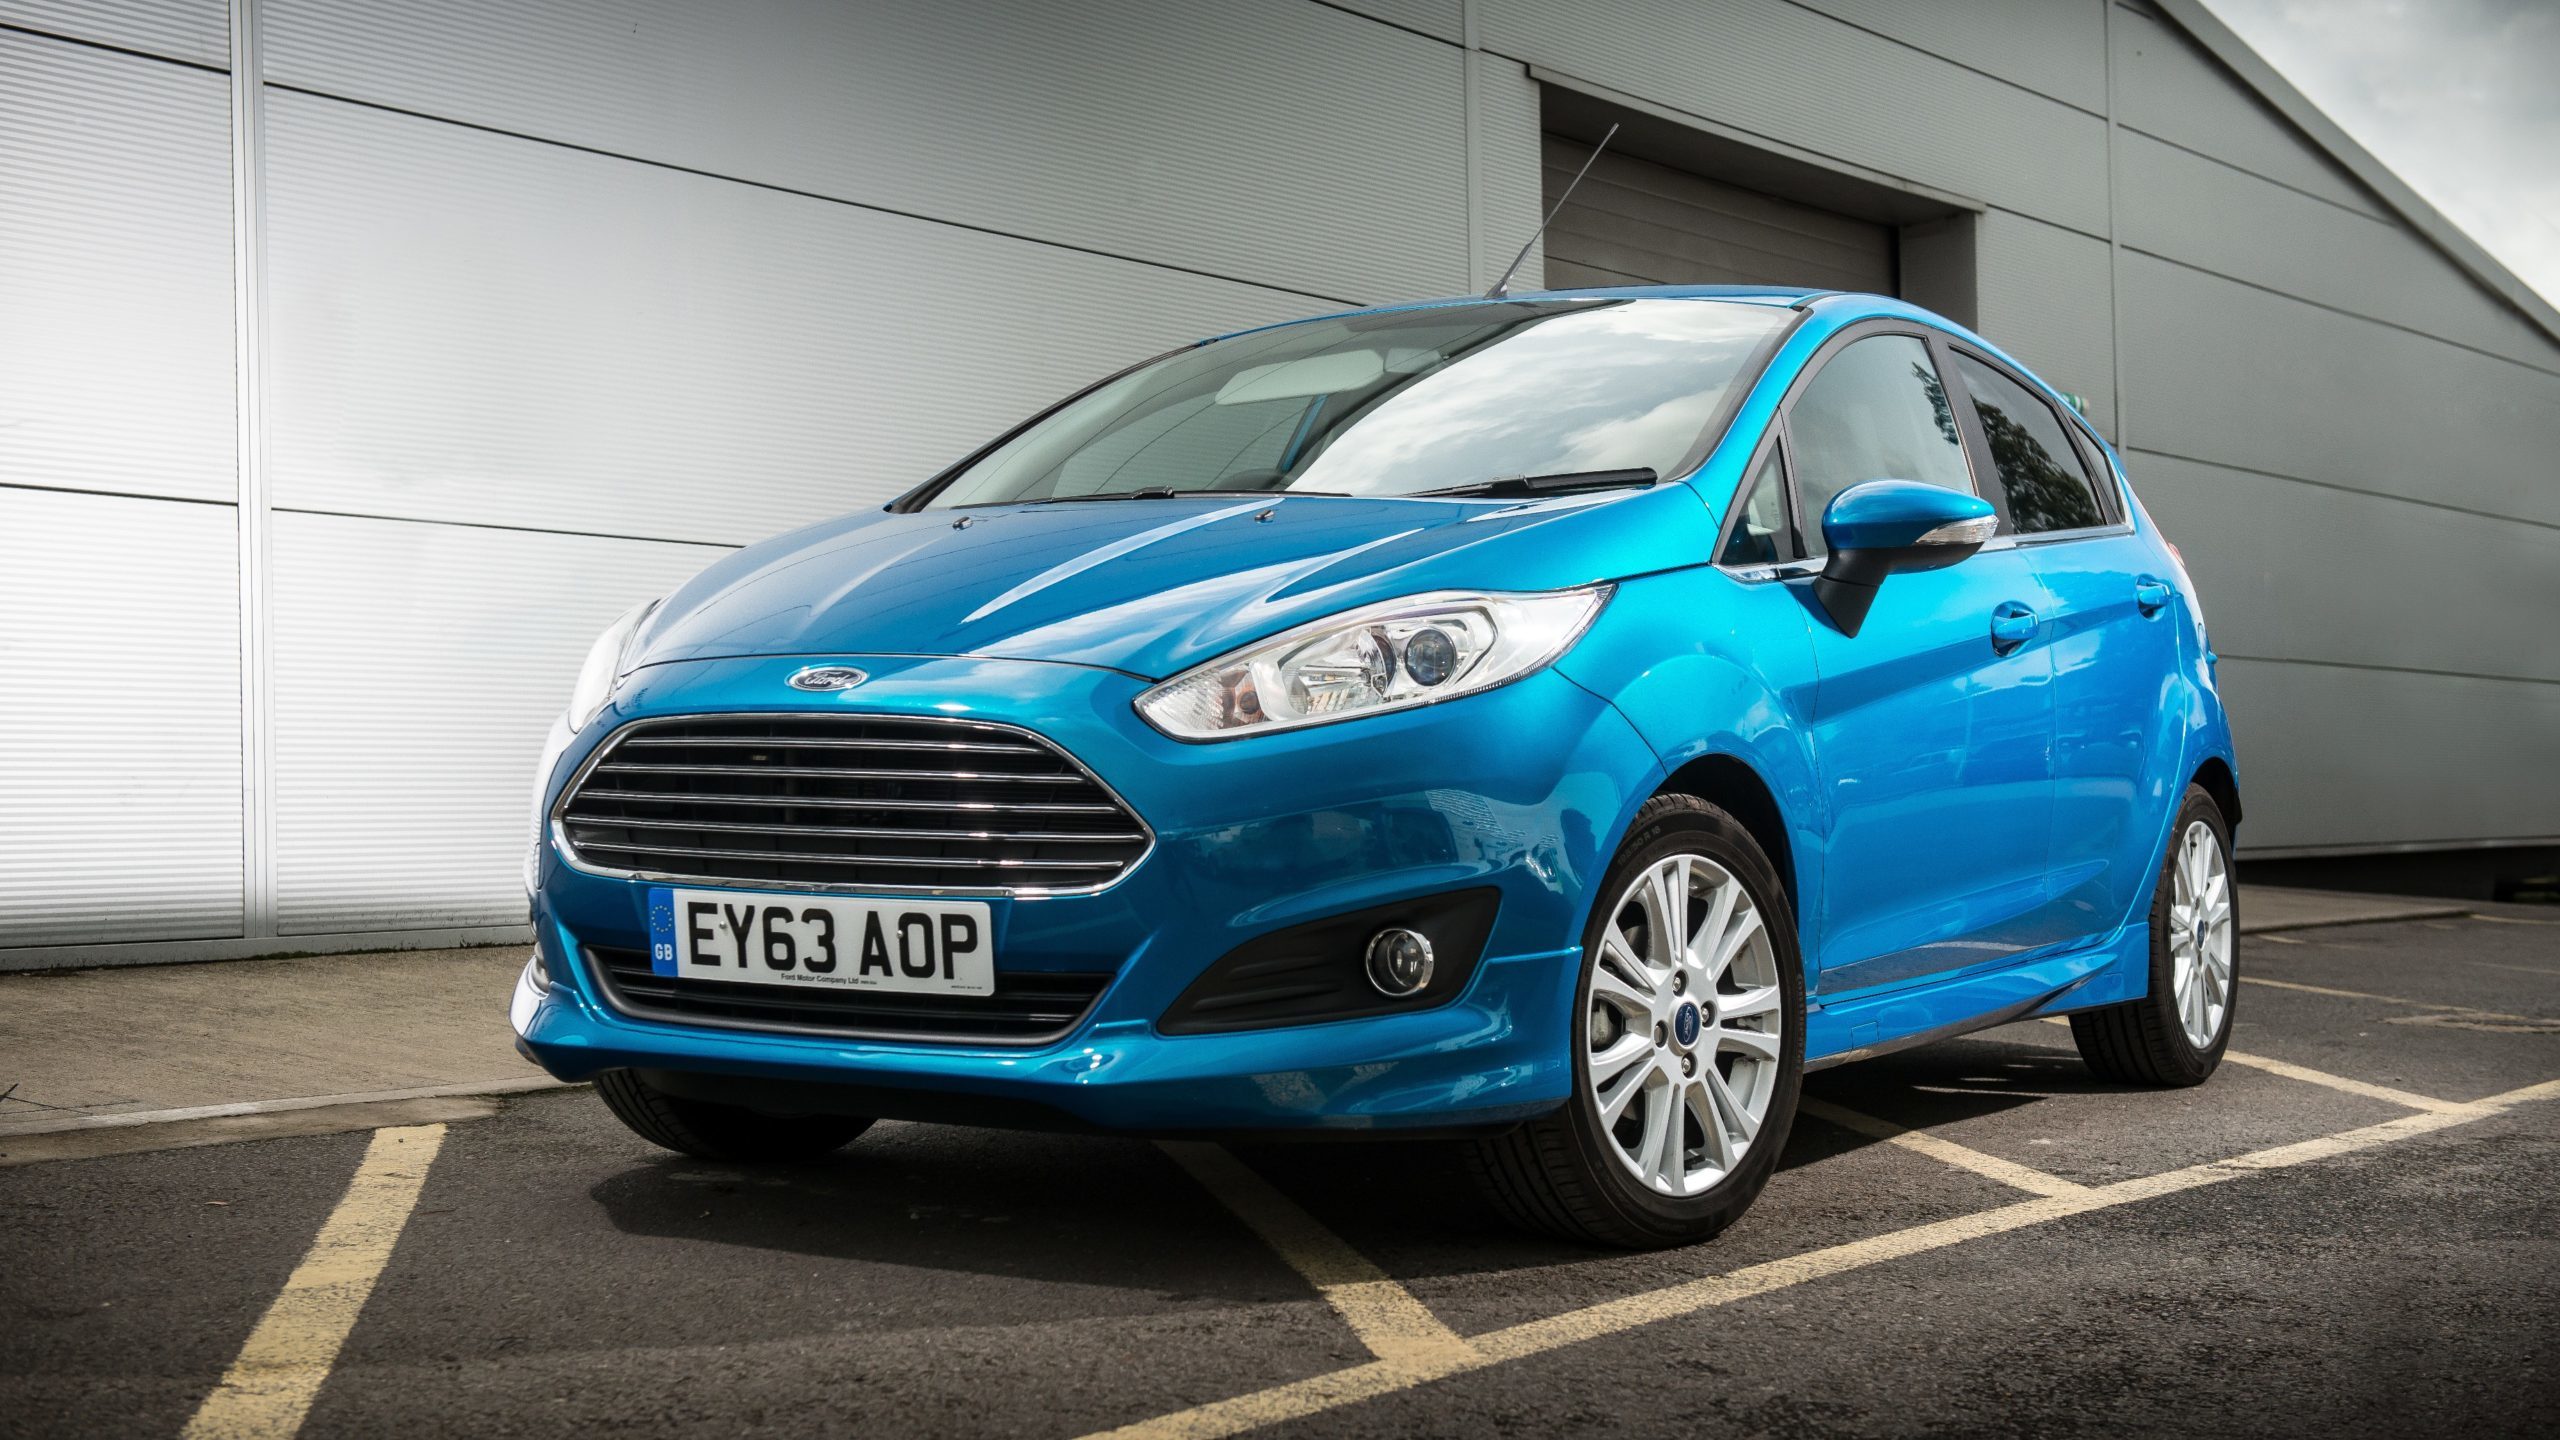 2013 Ford Fiesta Price, Value, Ratings & Reviews